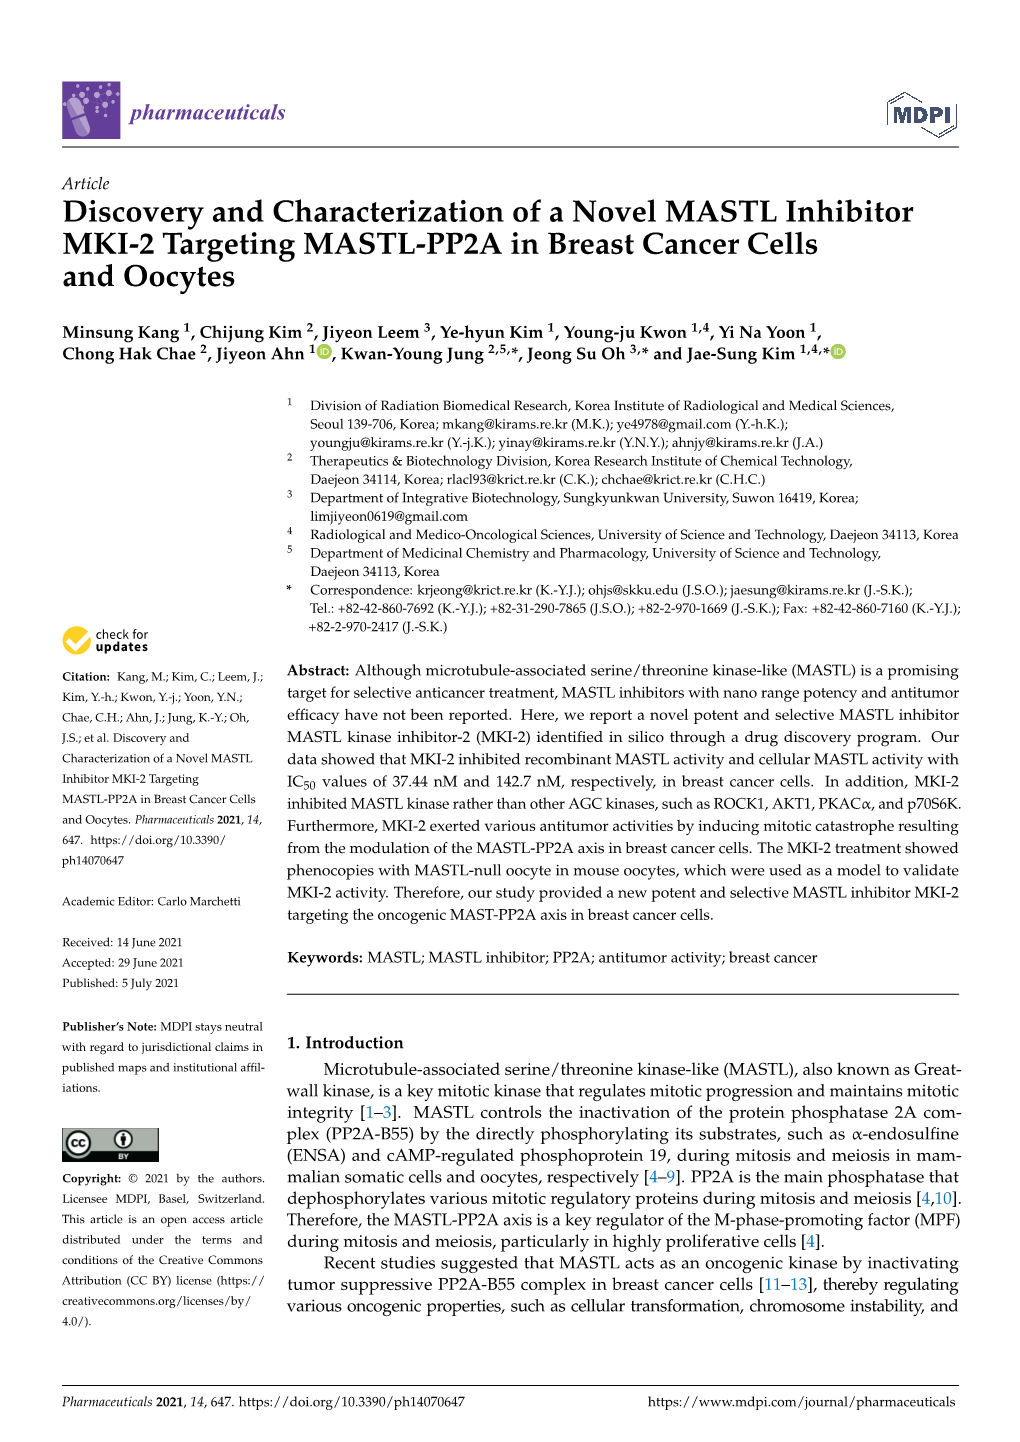 Discovery and Characterization of a Novel MASTL Inhibitor MKI-2 Targeting MASTL-PP2A in Breast Cancer Cells and Oocytes